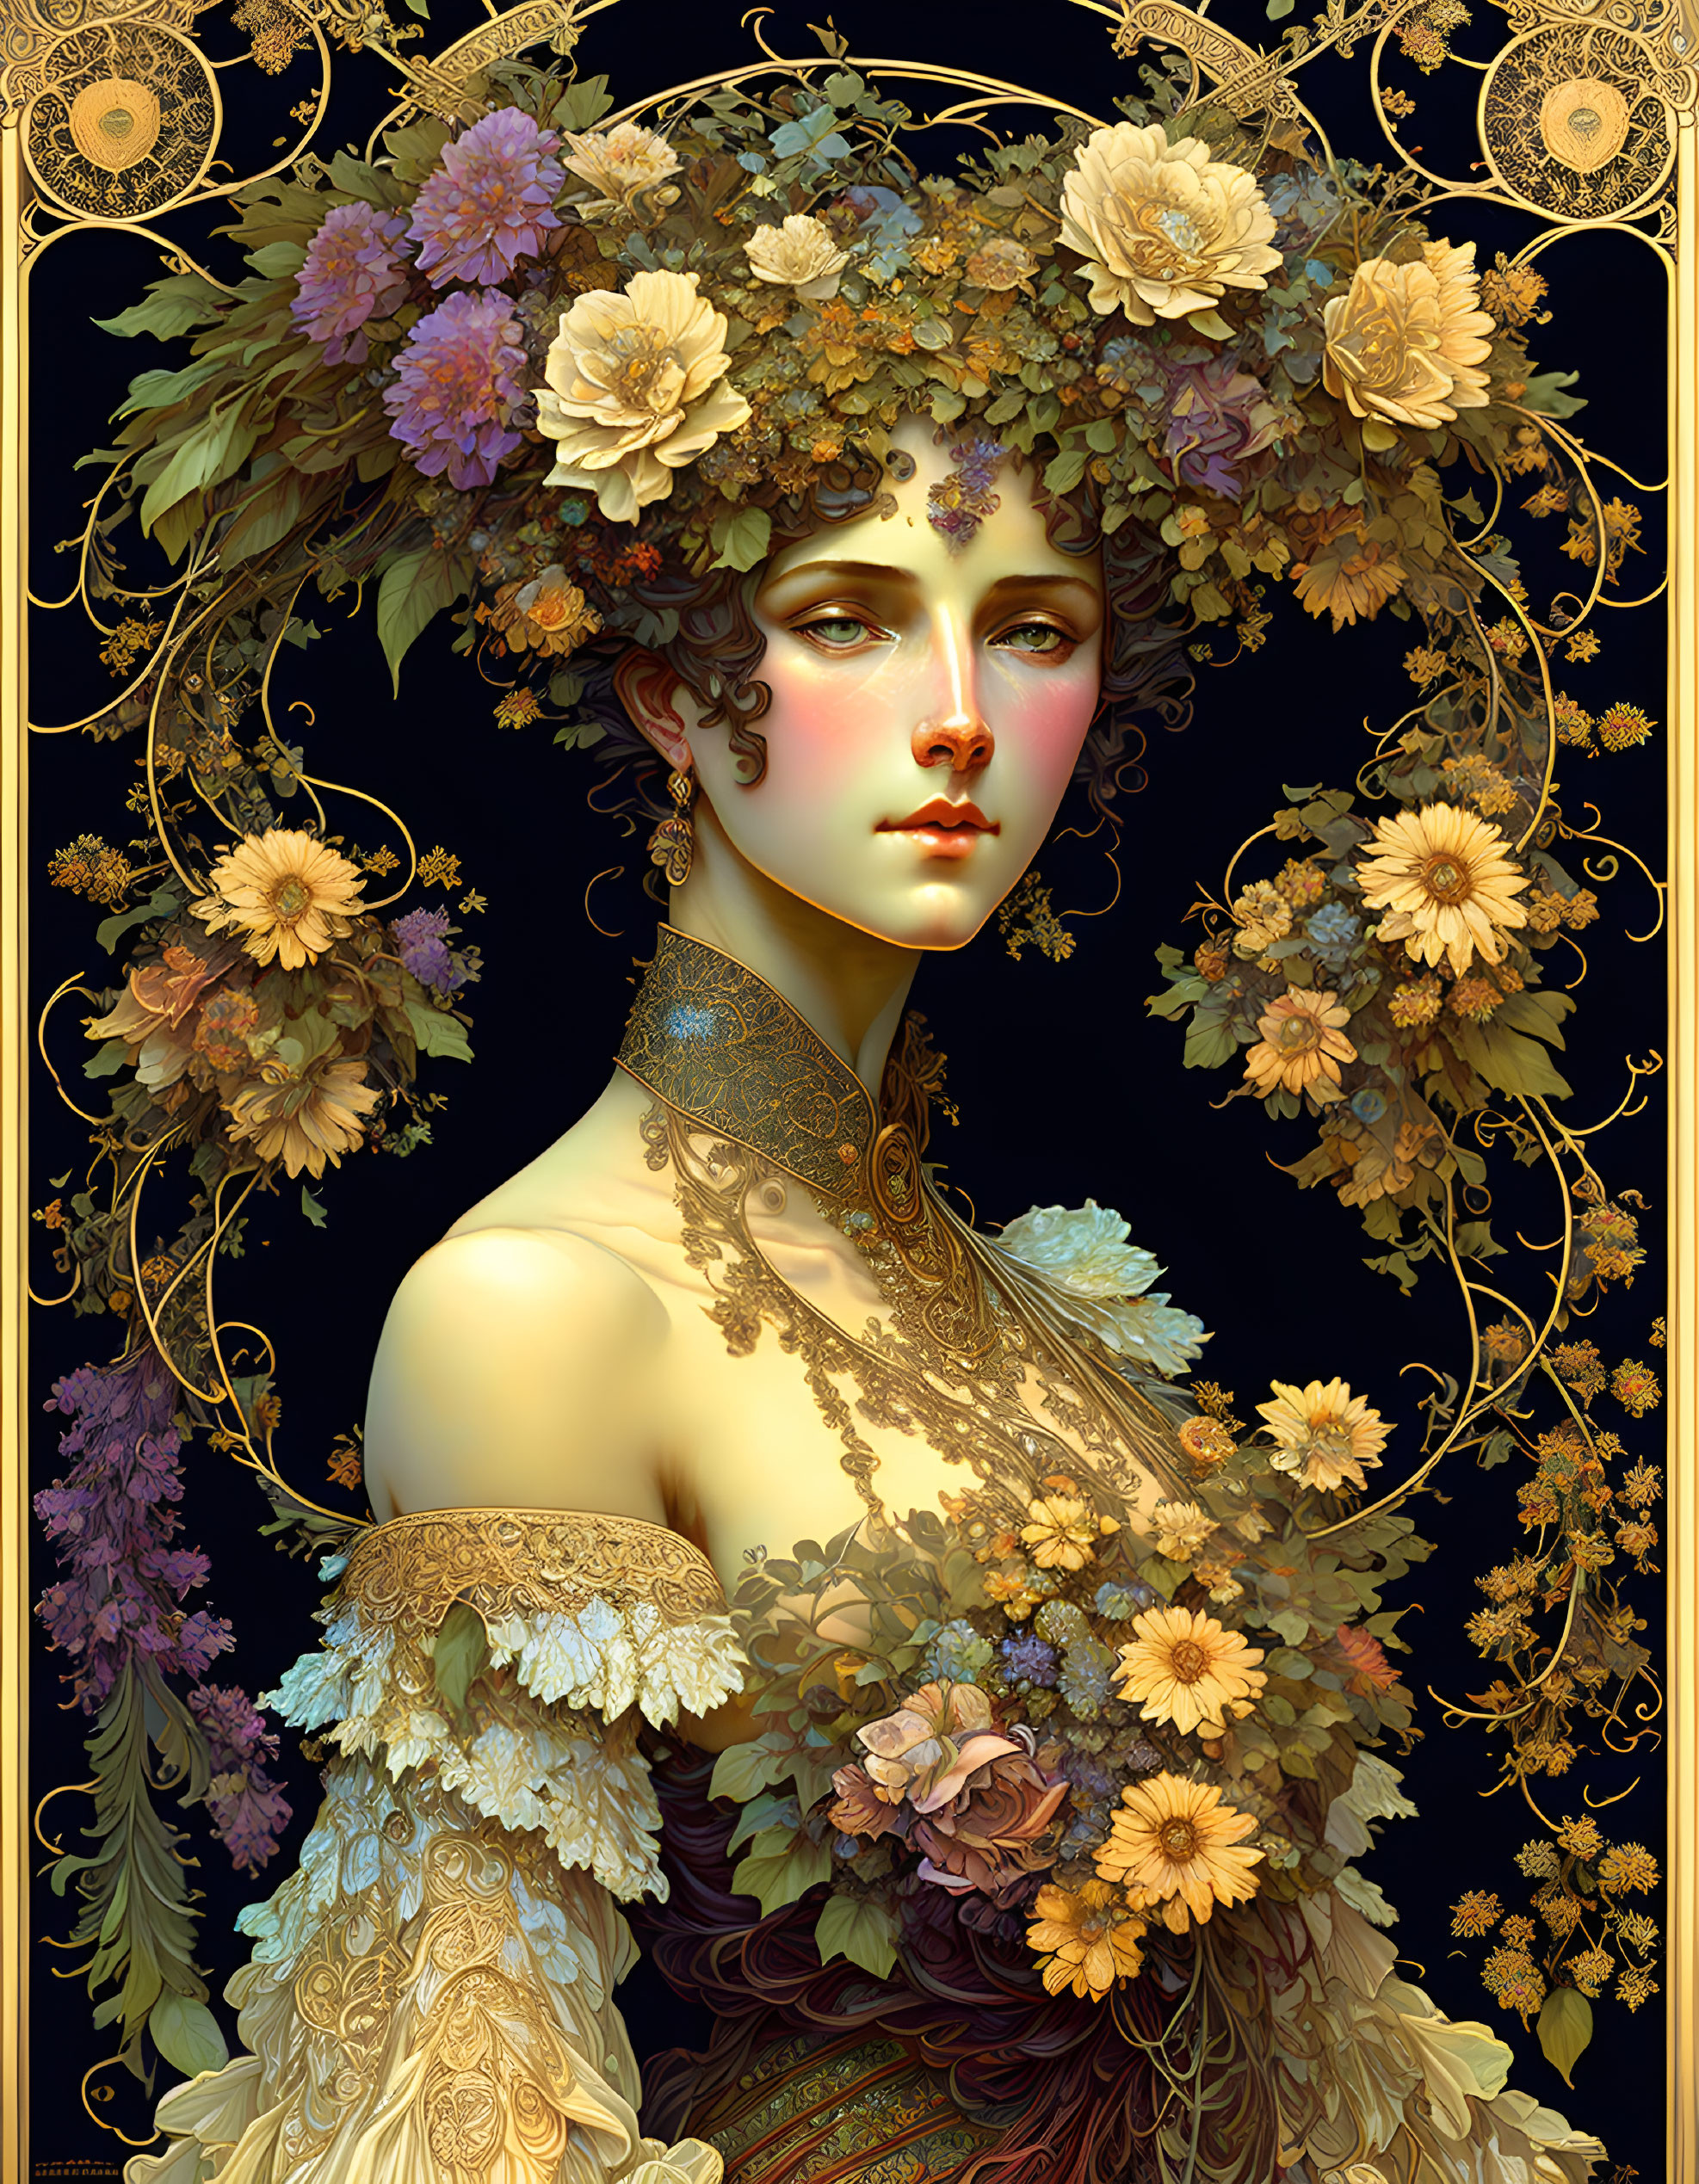 The Flower Woman